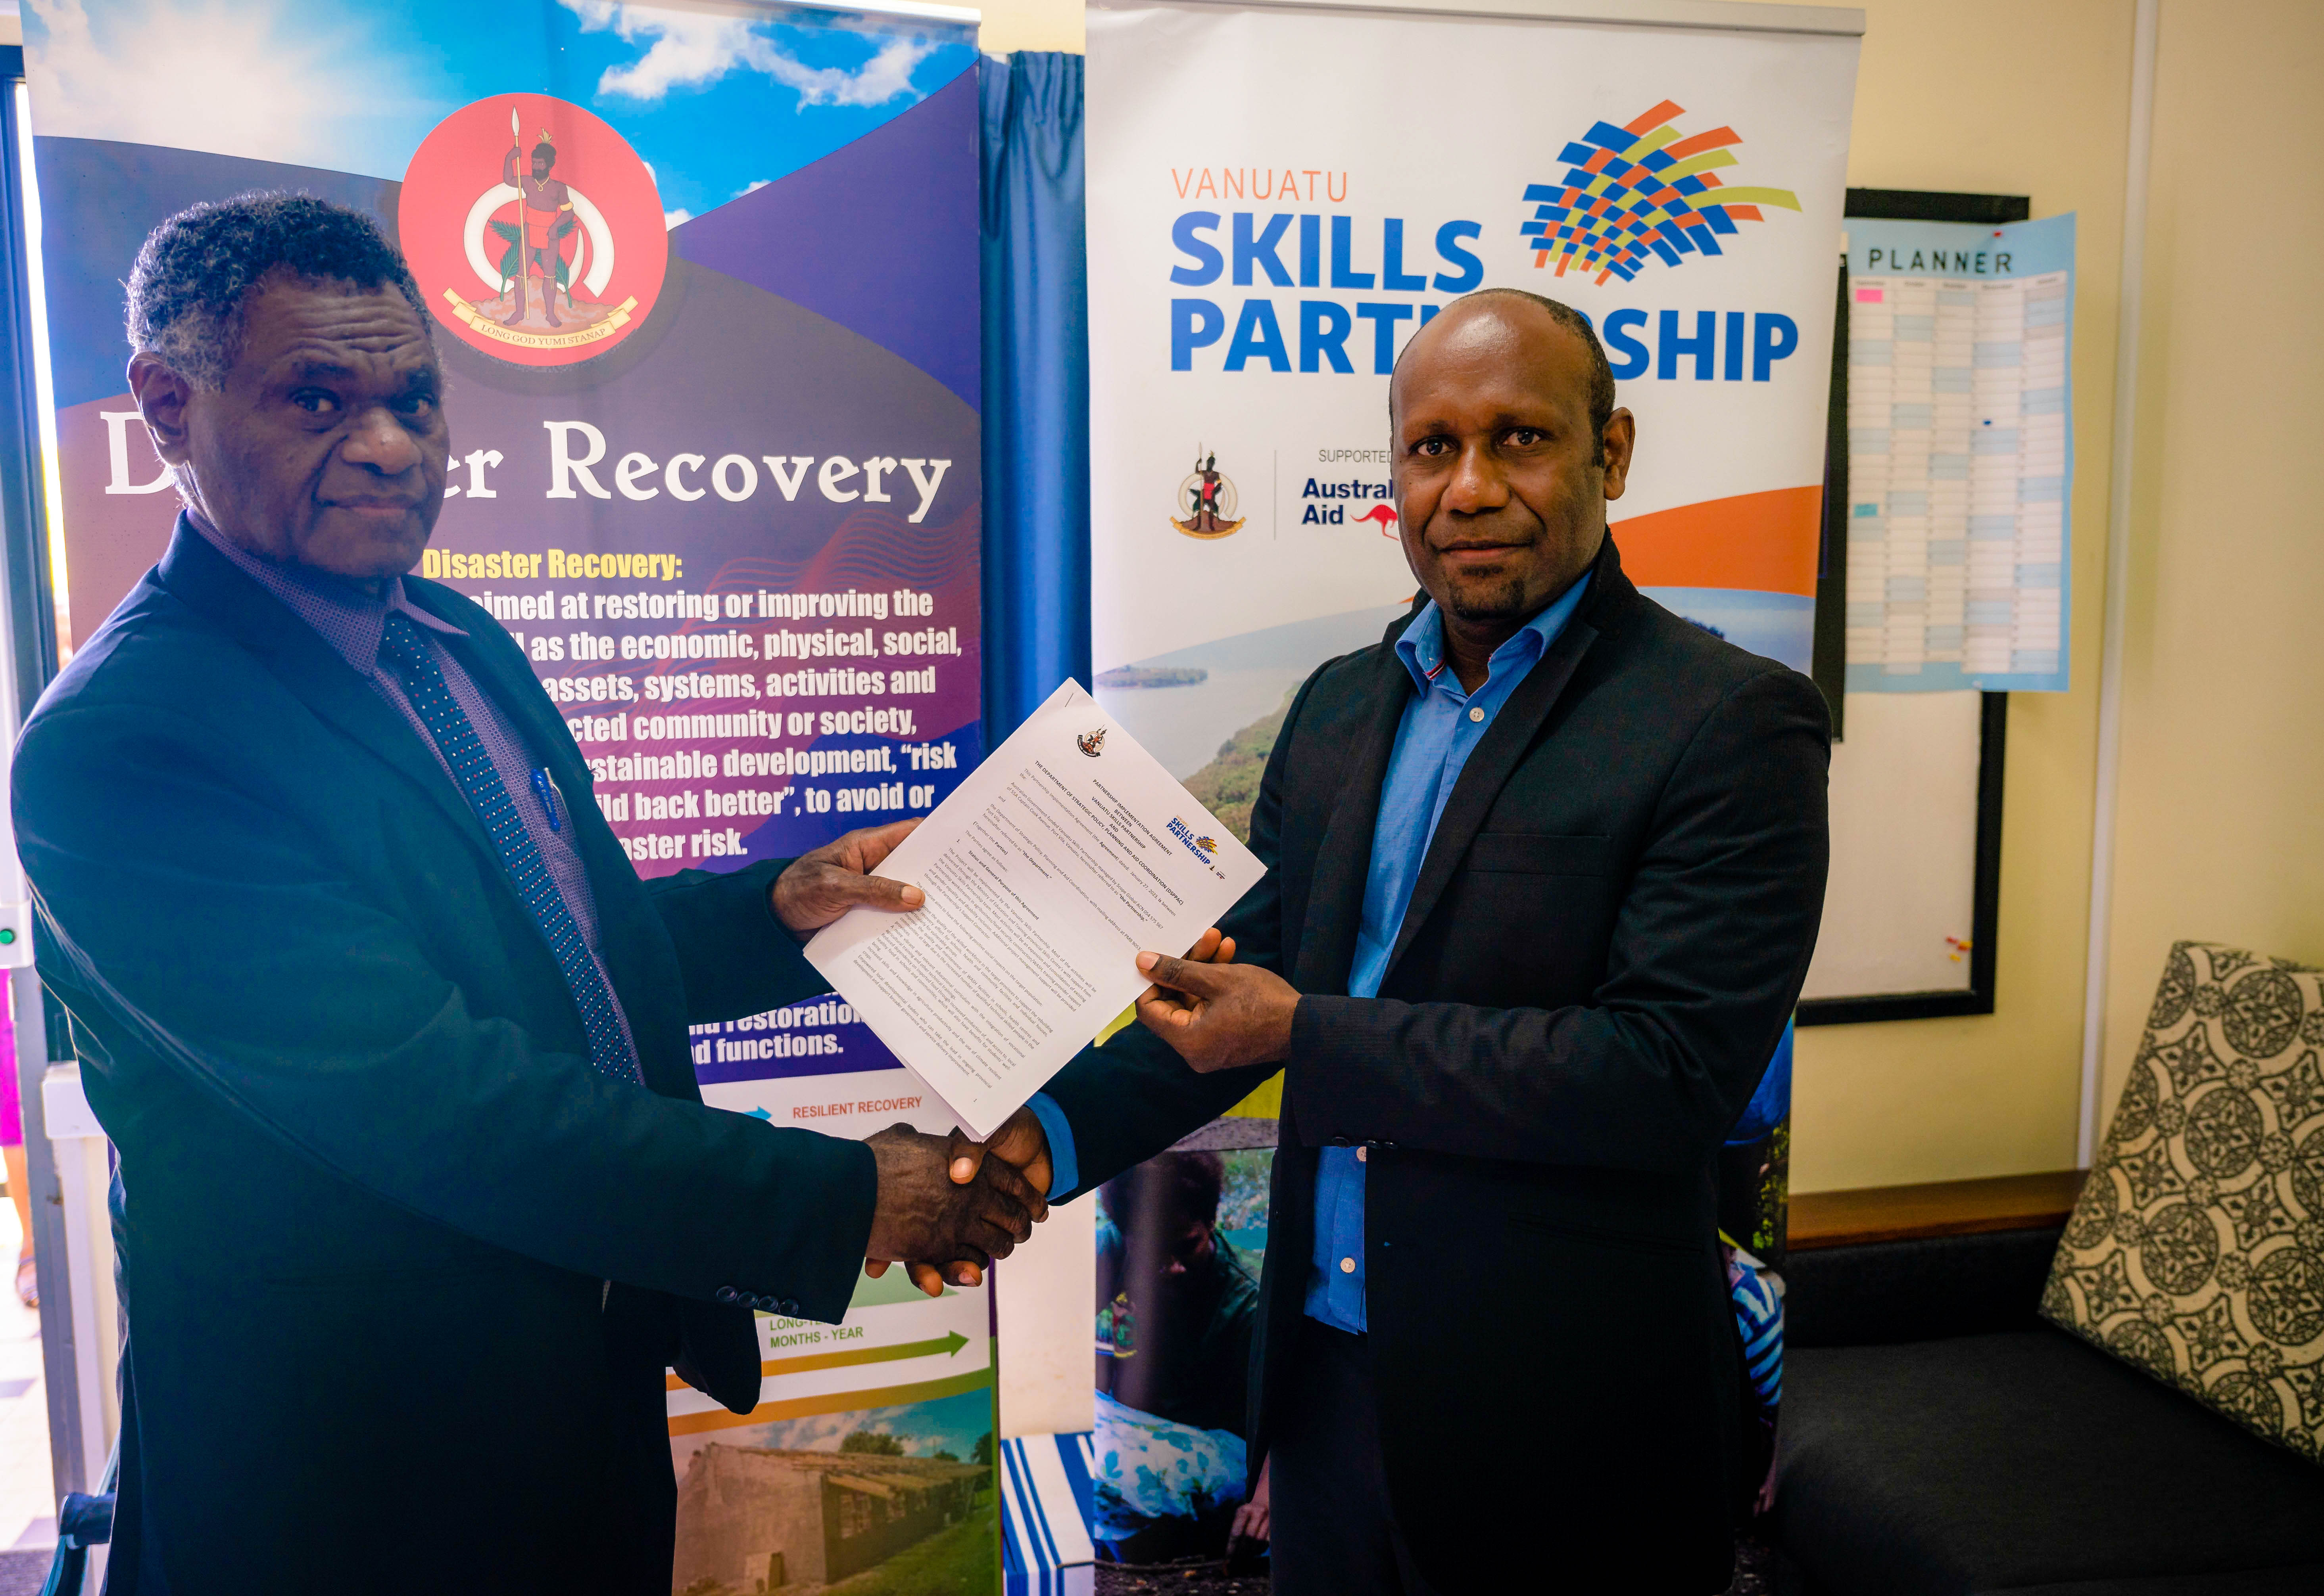 Vanuatu Skills Partnership and DSPPAC sign implementation partnership agreement for TC Harold recovery initiative